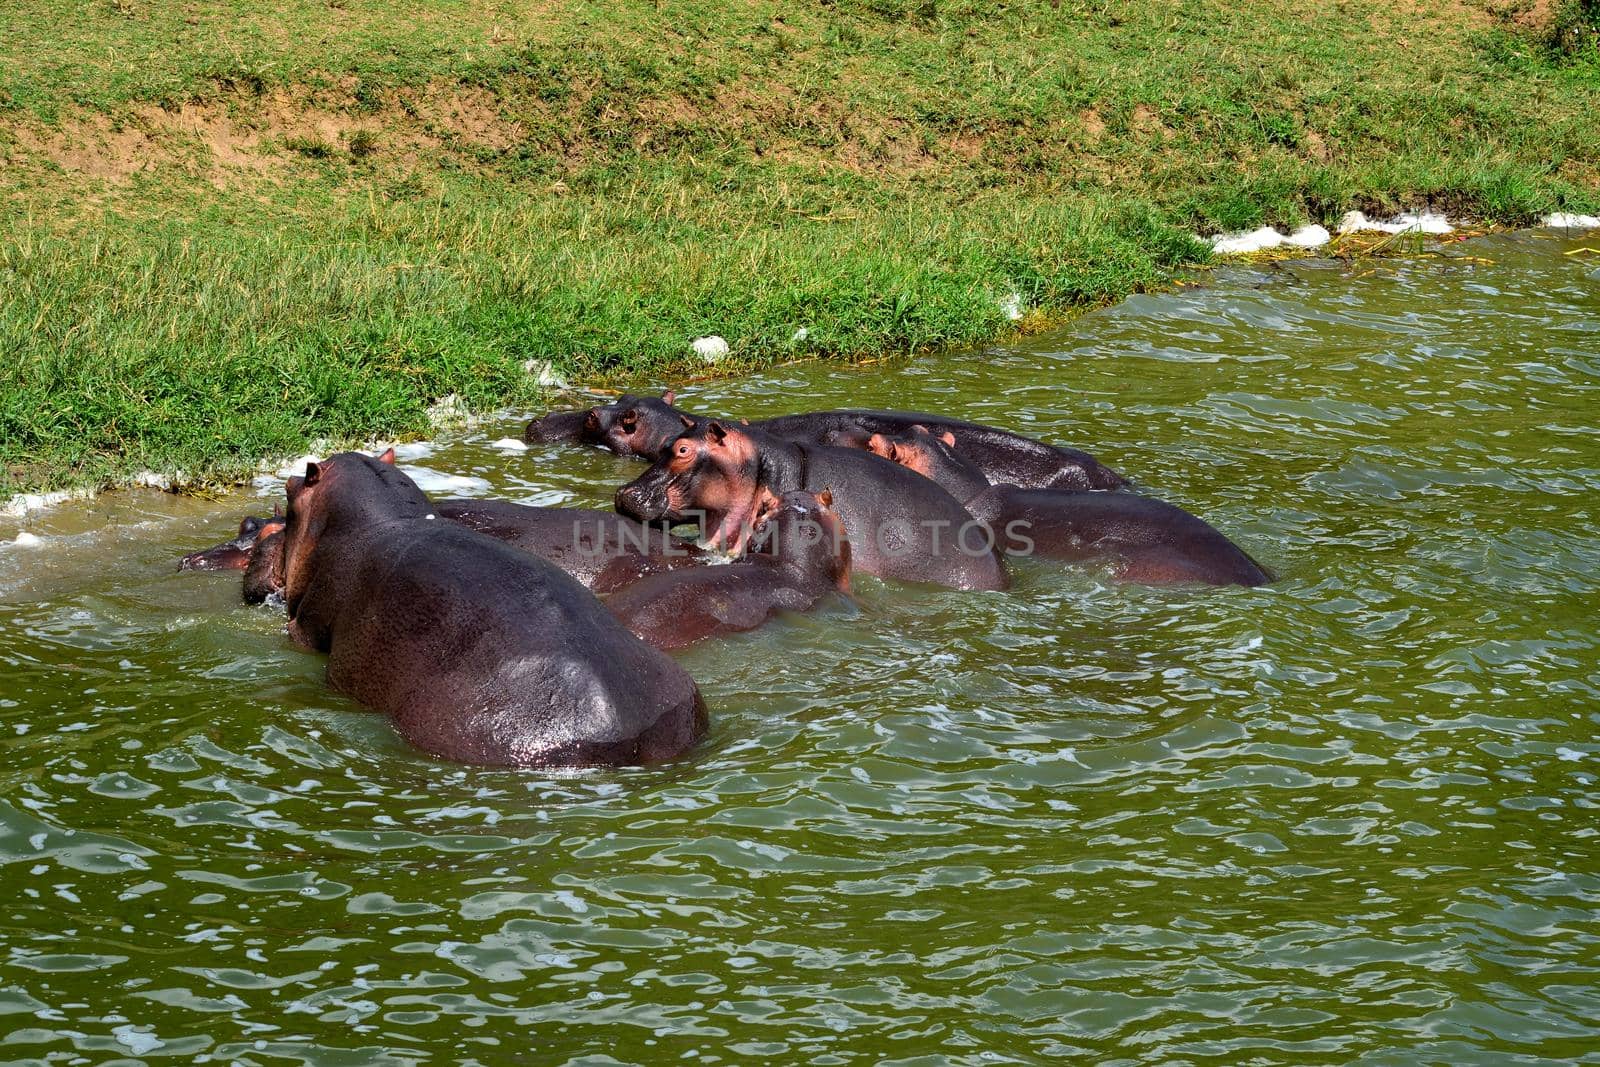 A huge hippopotamus and its cub in the Kazing chanel waters, Uganda